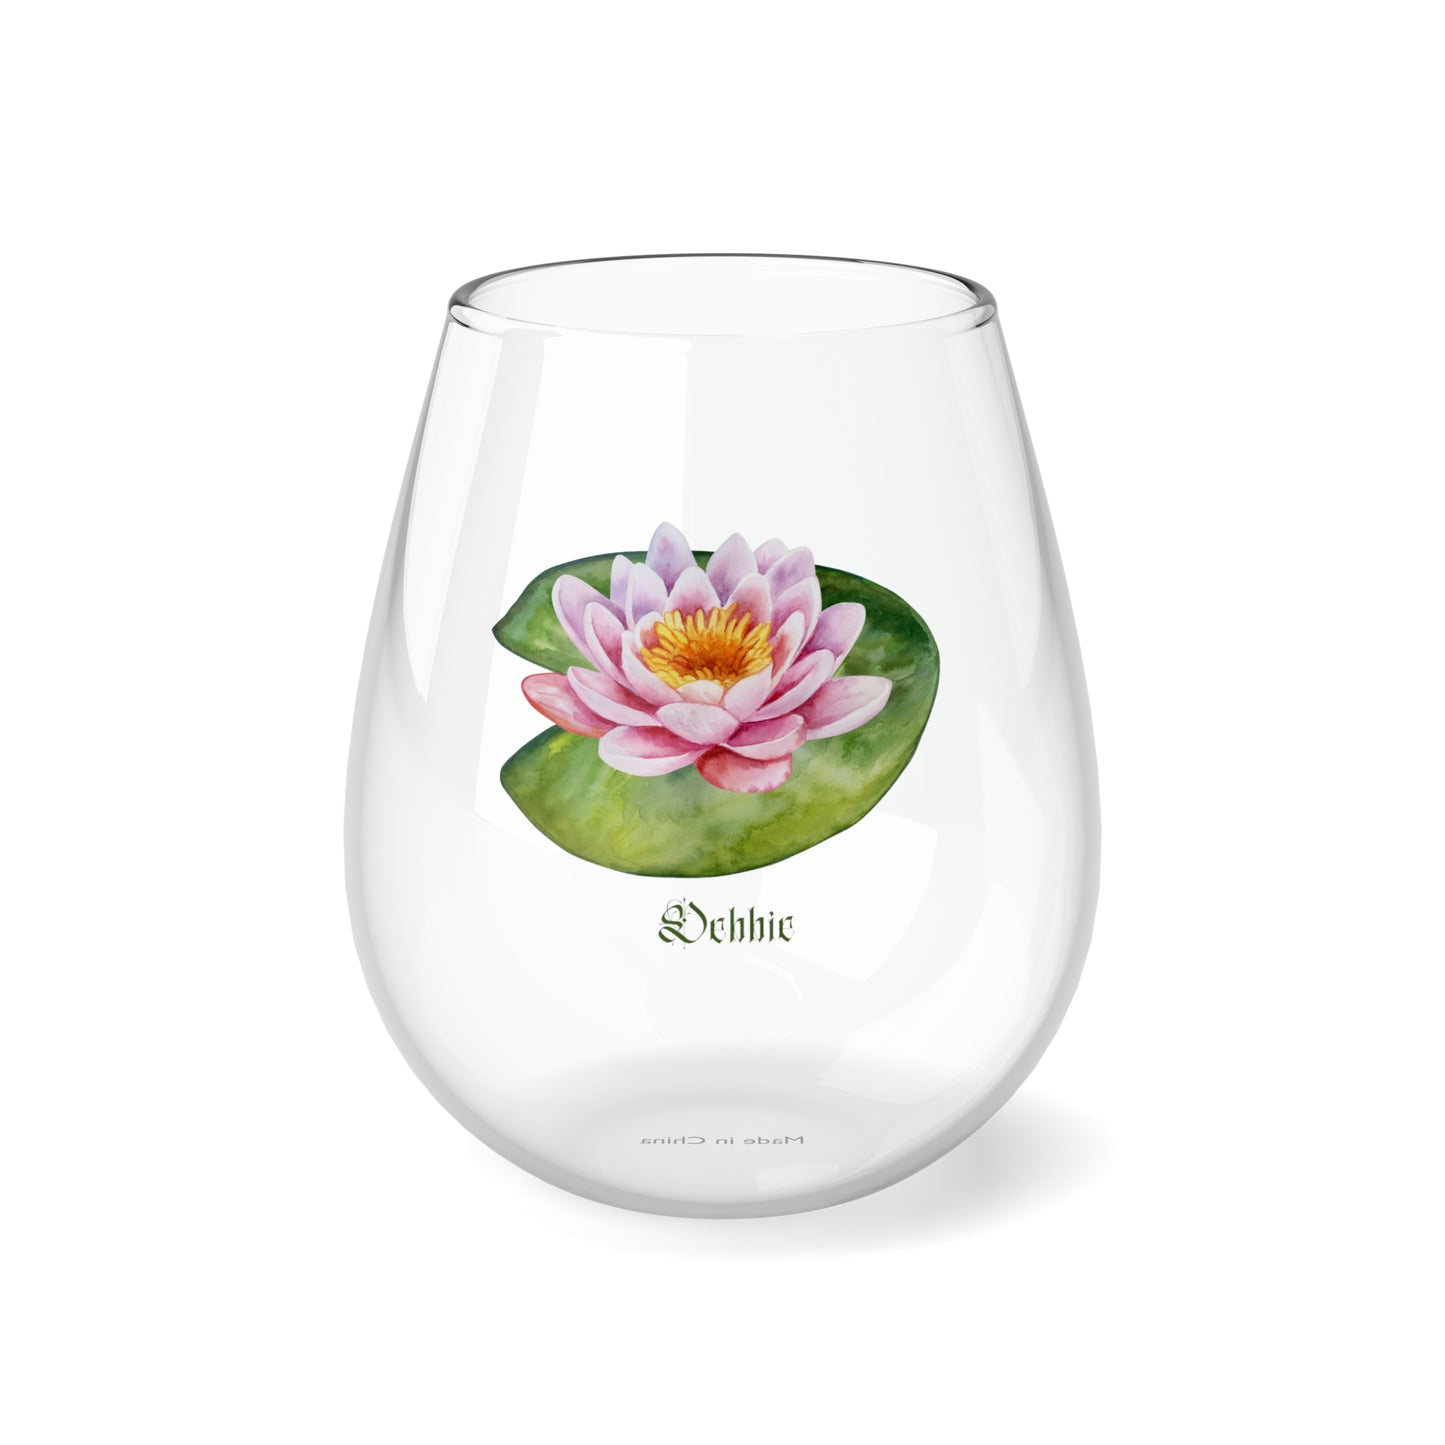 July PERSONALIZED Birth Flower Wine Glass, Birth Flower Gifts, Birth Flower wine glass, Birth Flower Gifts for Women, Gift for coworker, sister gift, birthday gift, Valentine gift, Stemless Wine Glass, 11.75oz